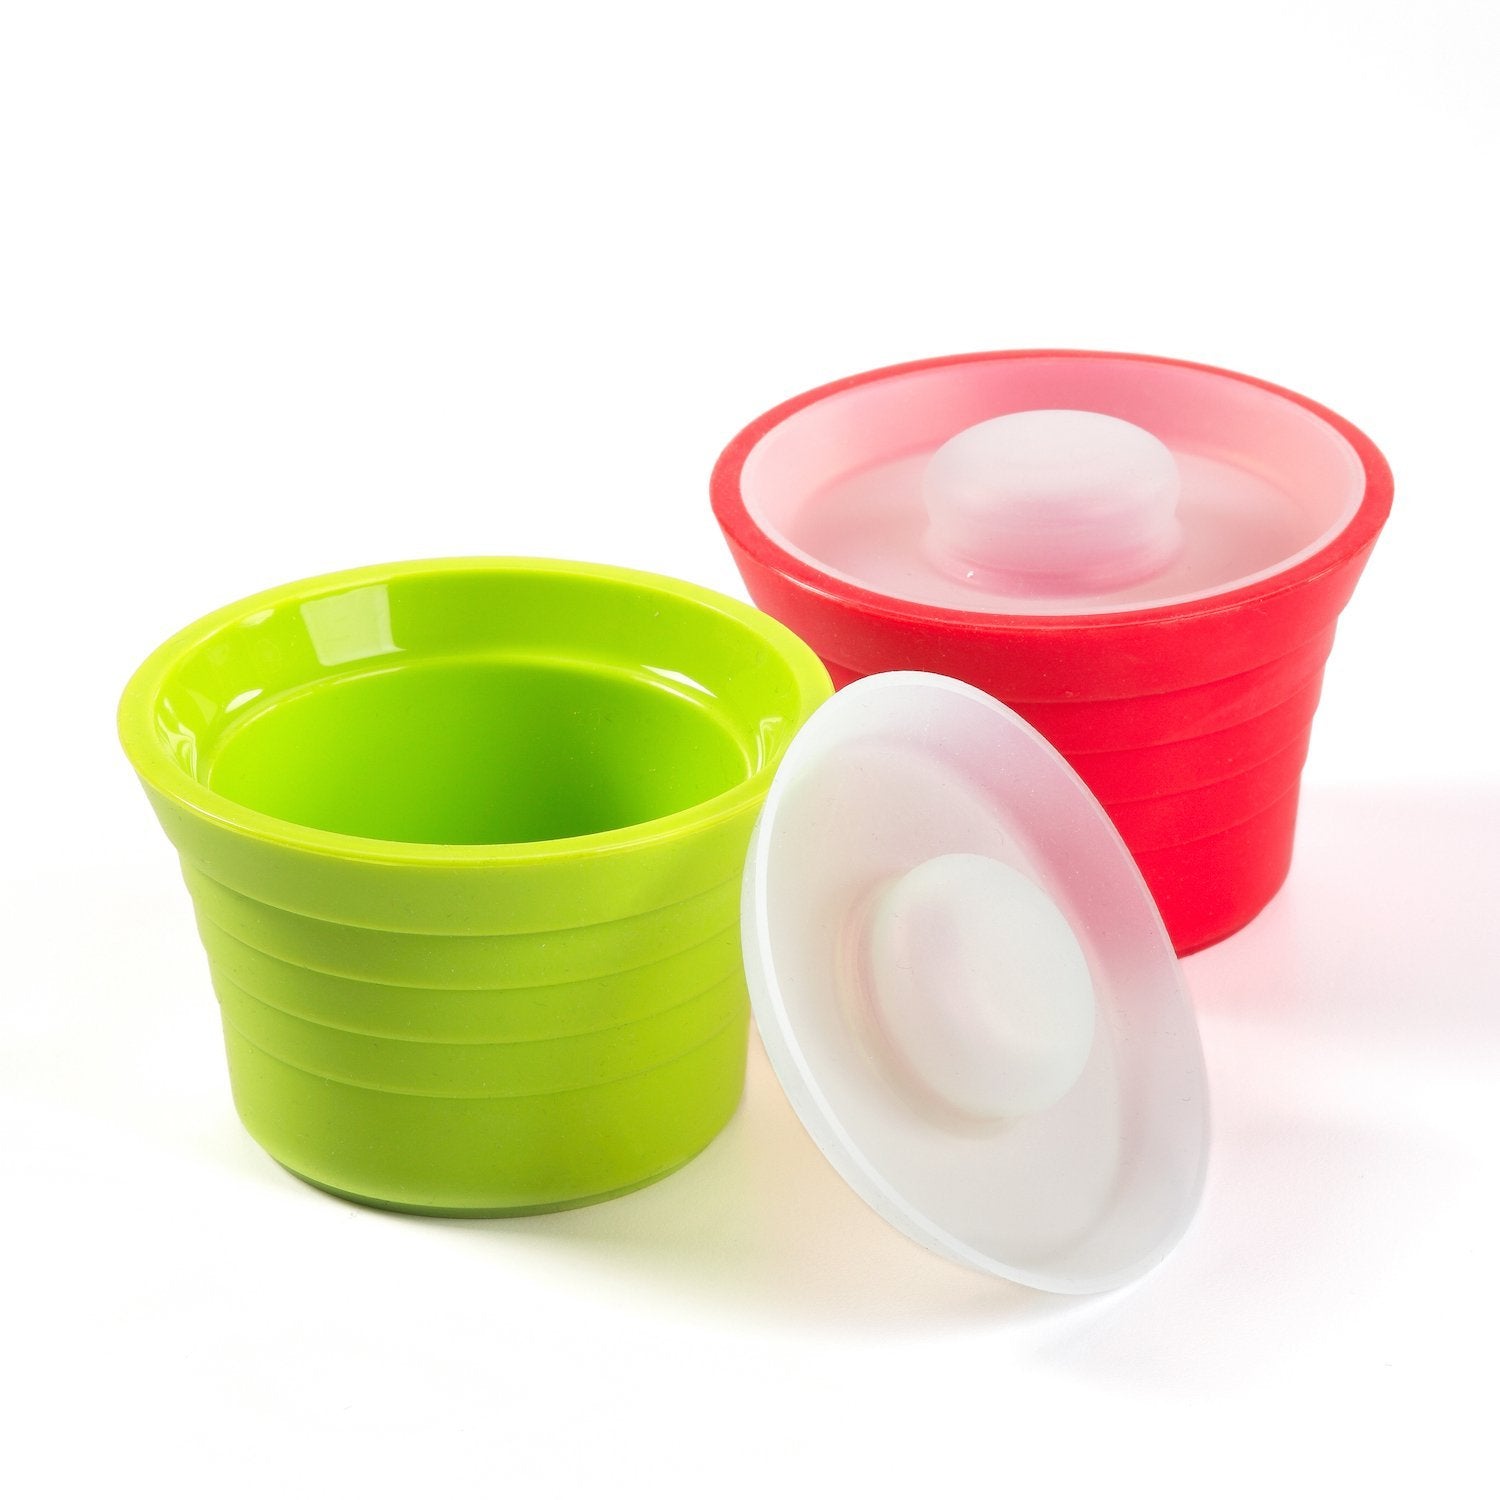 Kinderville 2-Pack 3.5 Ounce Little Bites Storage Silicone Jars Green/Red